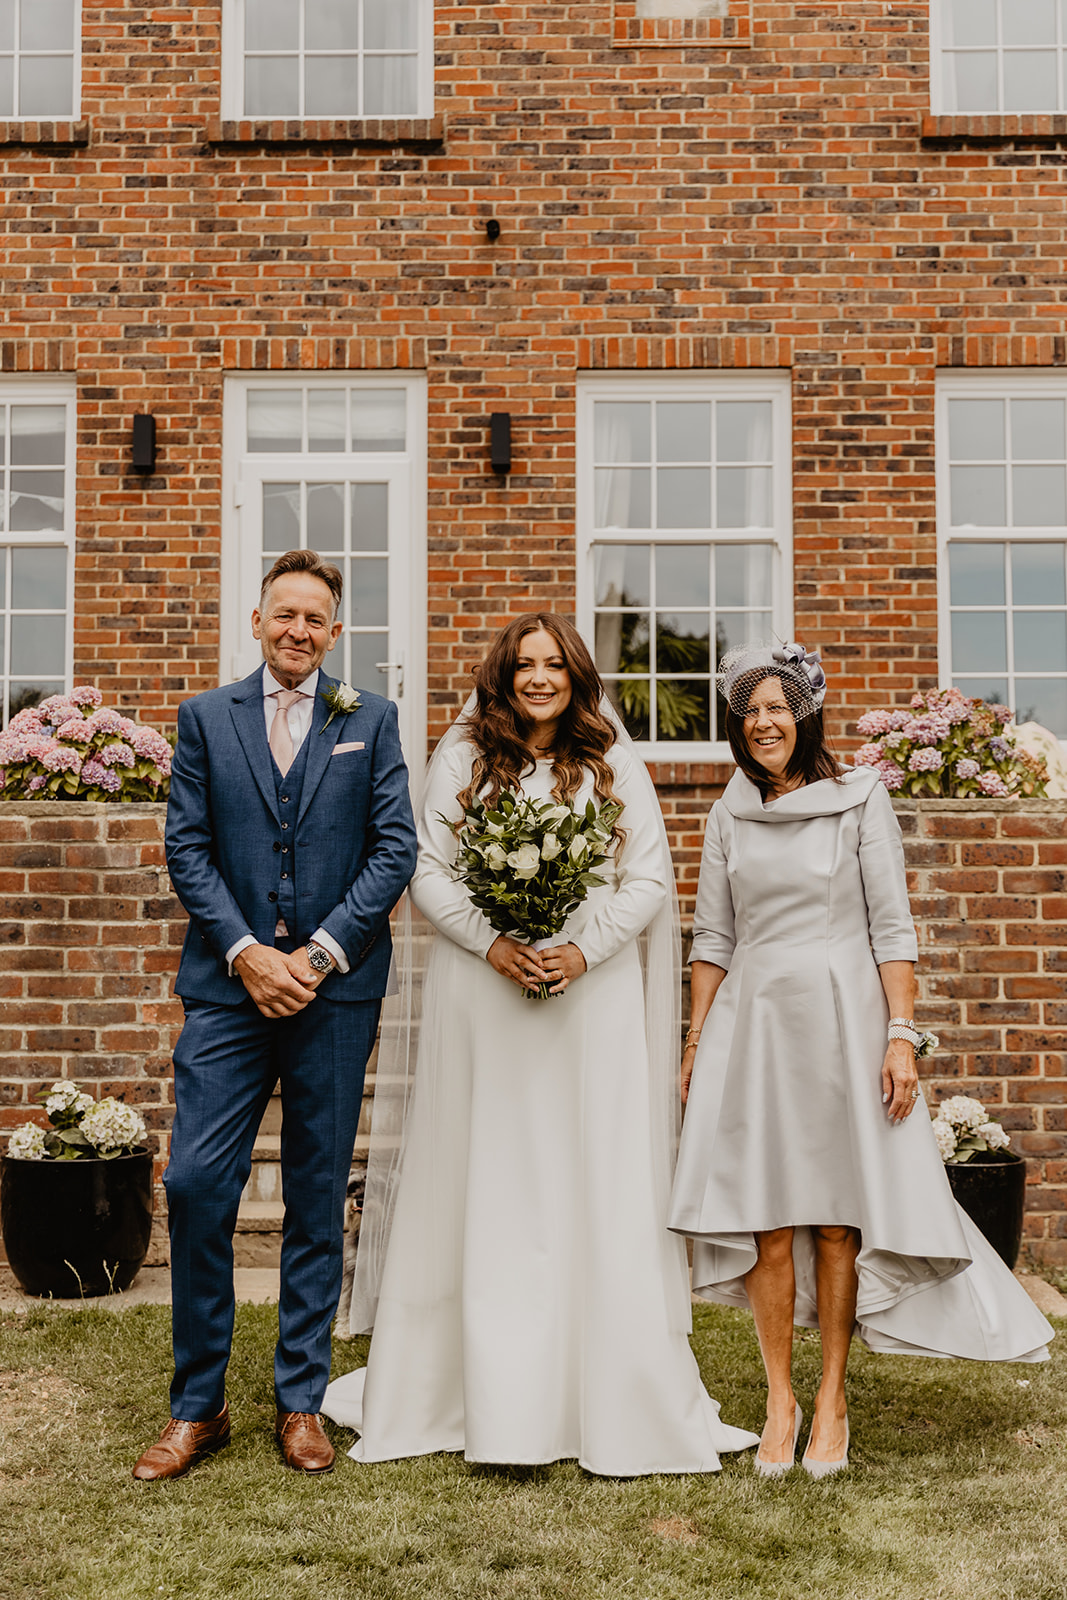 Bride and her parents at a Field Place Manor House Wedding in Worthing, Sussex. By Olive Joy Photography